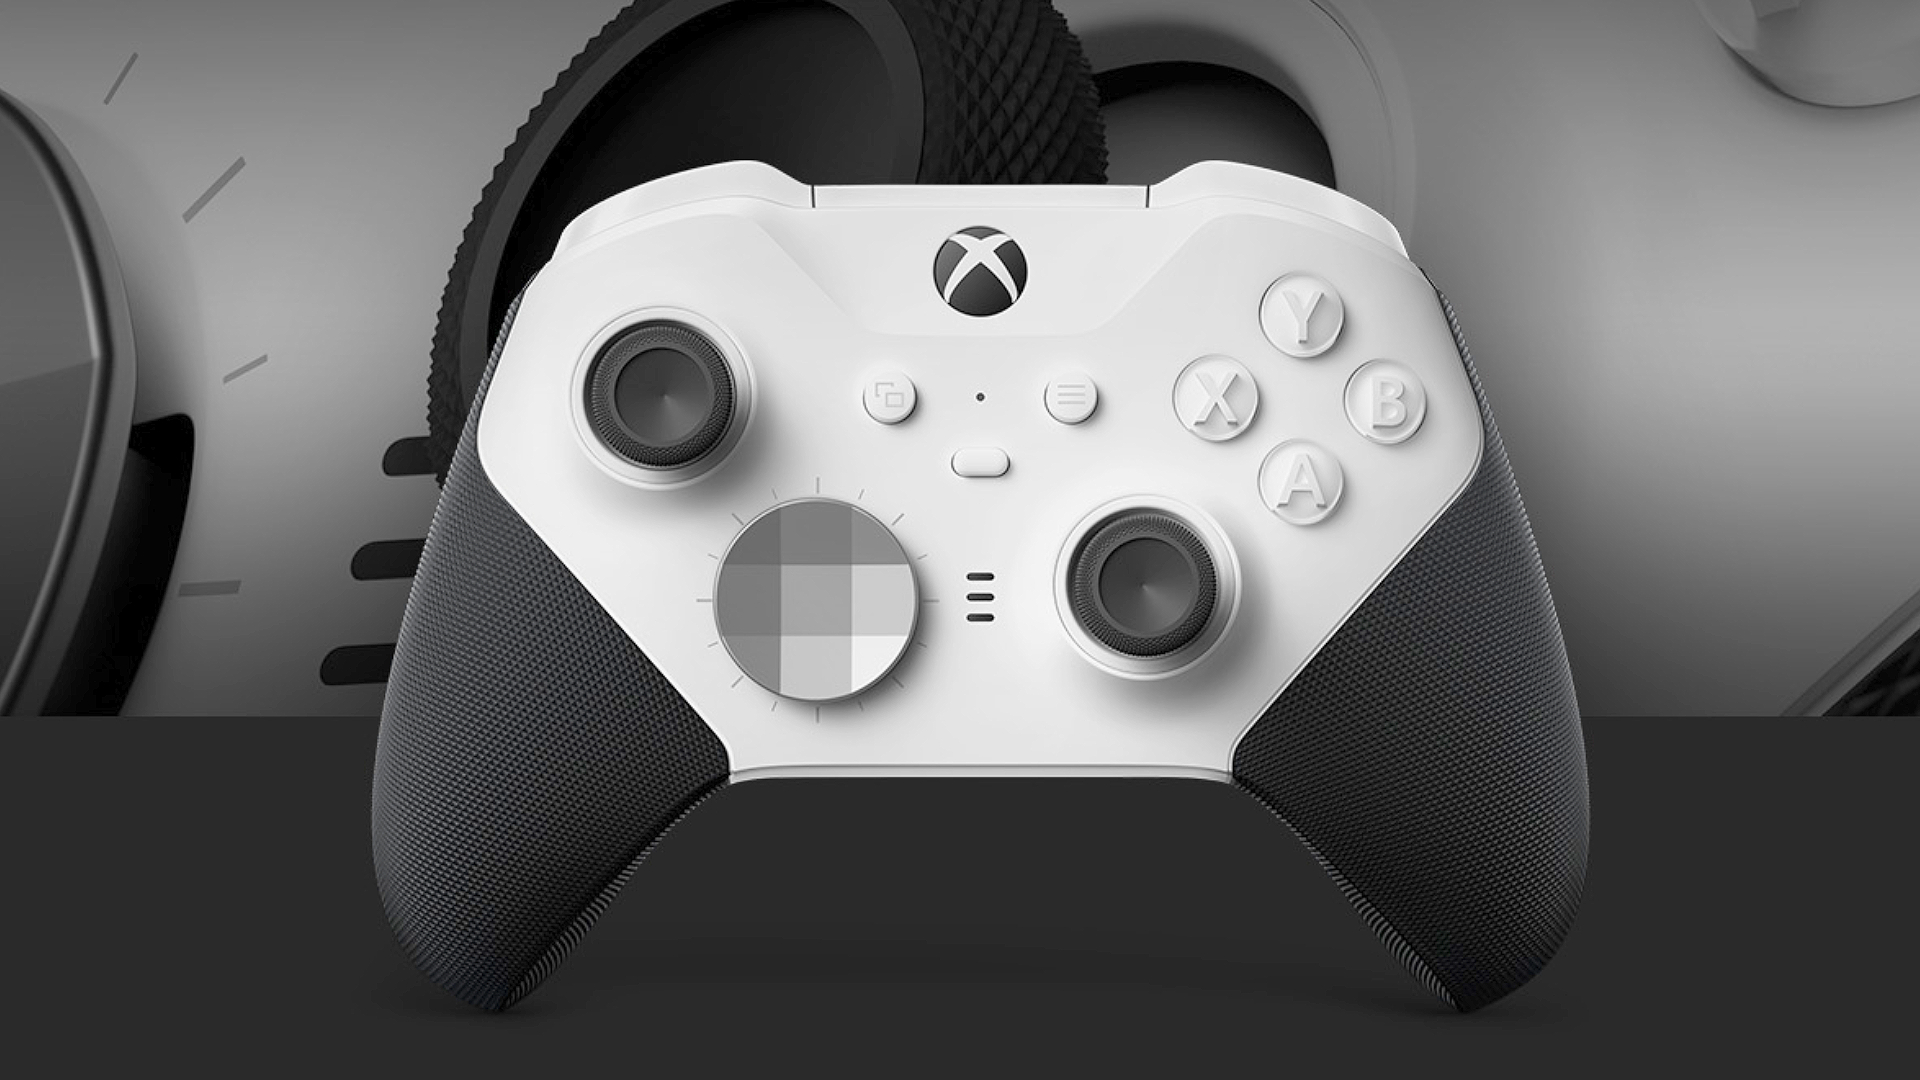 There's now a cheaper Xbox Pro controller for your gaming PC